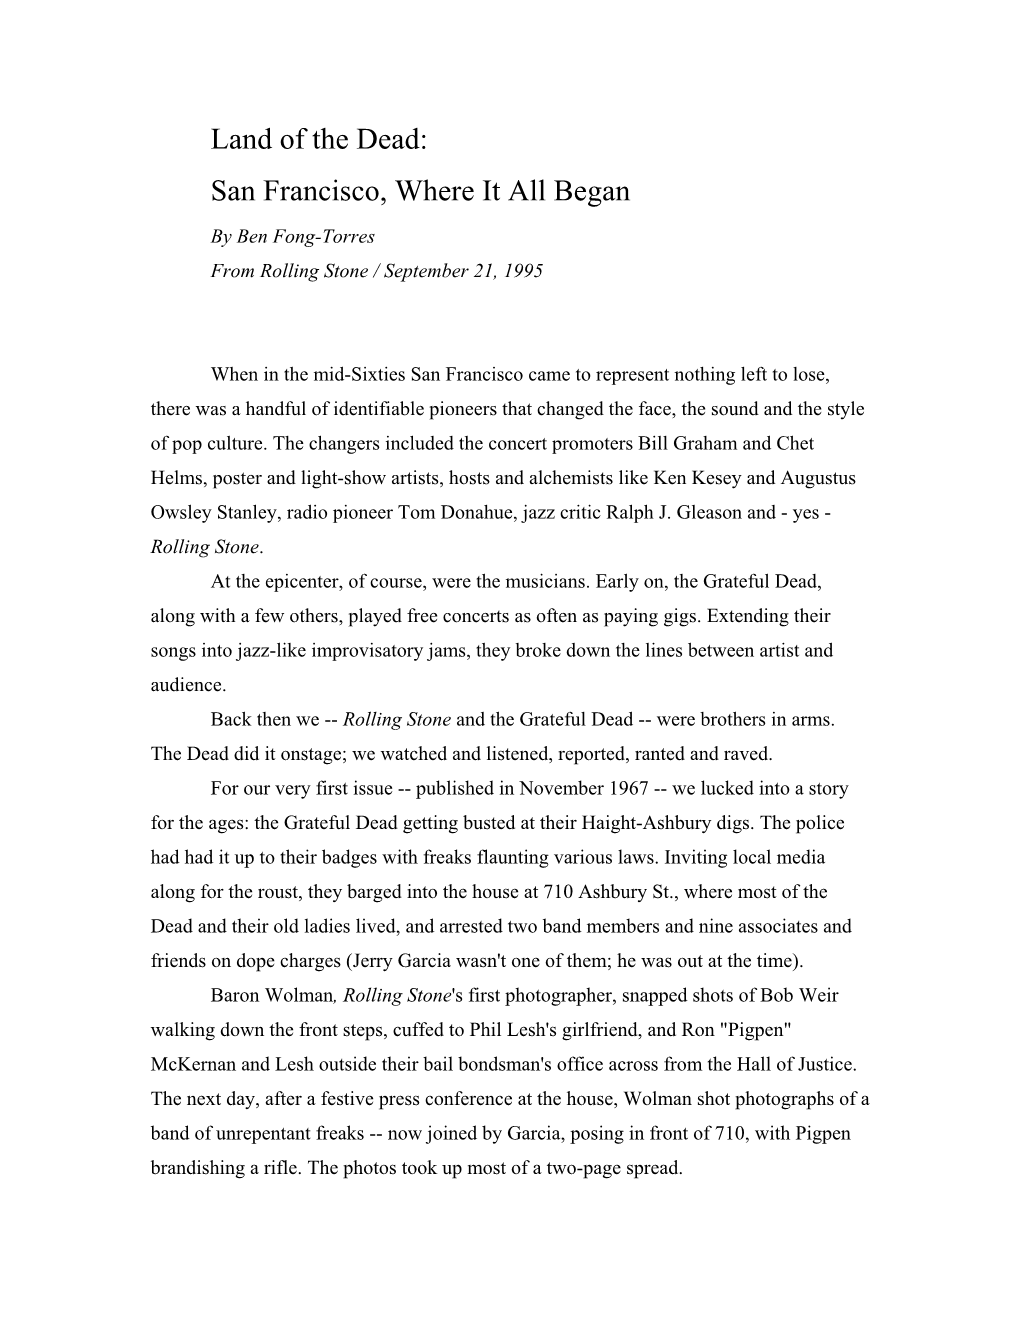 Land of the Dead: San Francisco, Where It All Began by Ben Fong-Torres from Rolling Stone / September 21, 1995